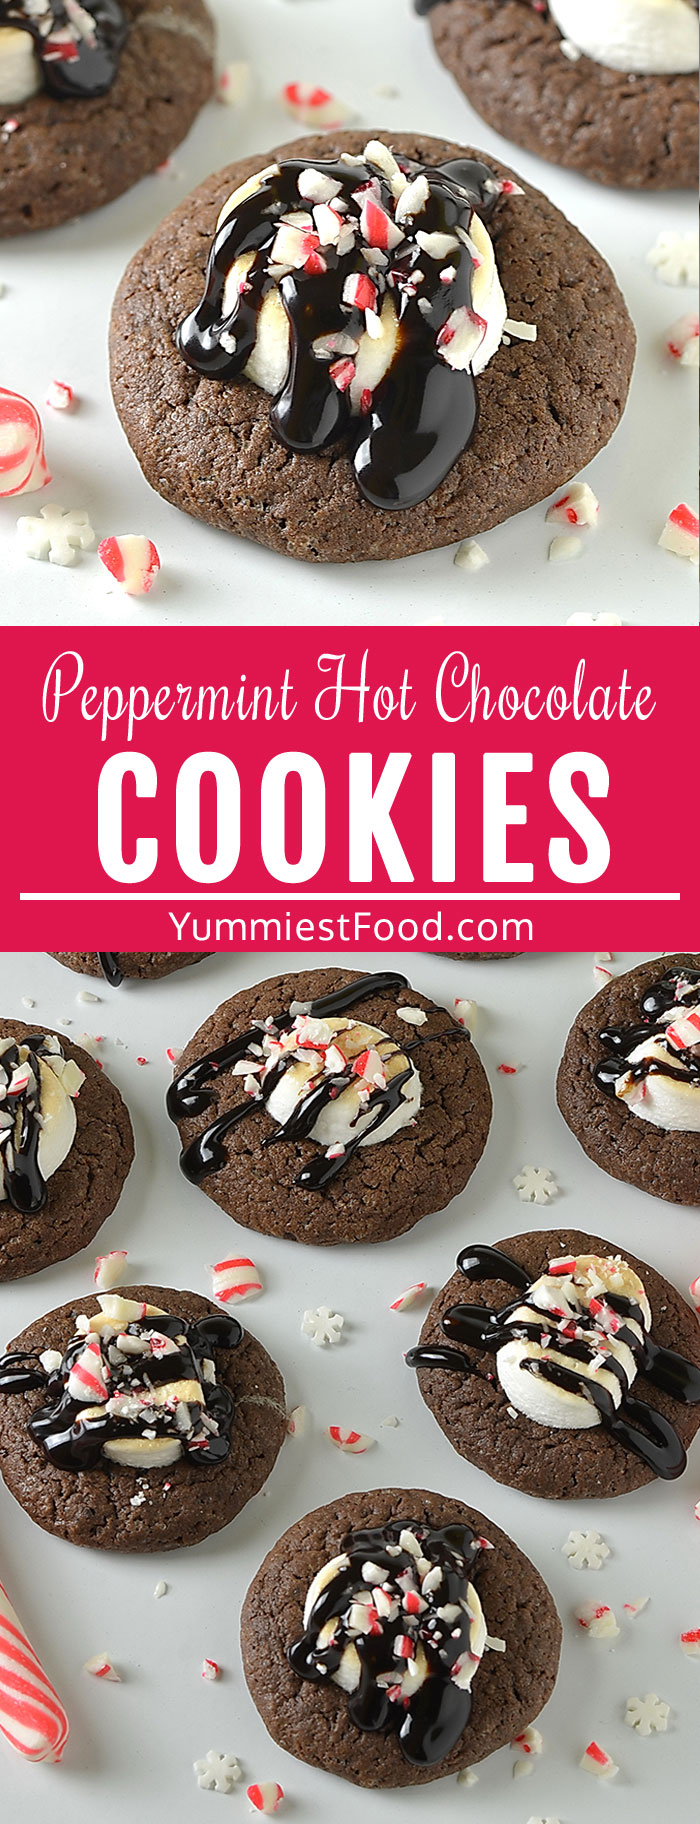 Peppermint Hot Chocolate Cookies are the perfect treat to have on hand during the Holiday season! Decadently rich peppermint chocolate cookies with a lot of chocolate, melted marshmallows stacked on top with chocolate icing and crushed candy cane! #christmas #christmasrecipes #chocolate #desserts #dessertrecipes #cookies #easycookies